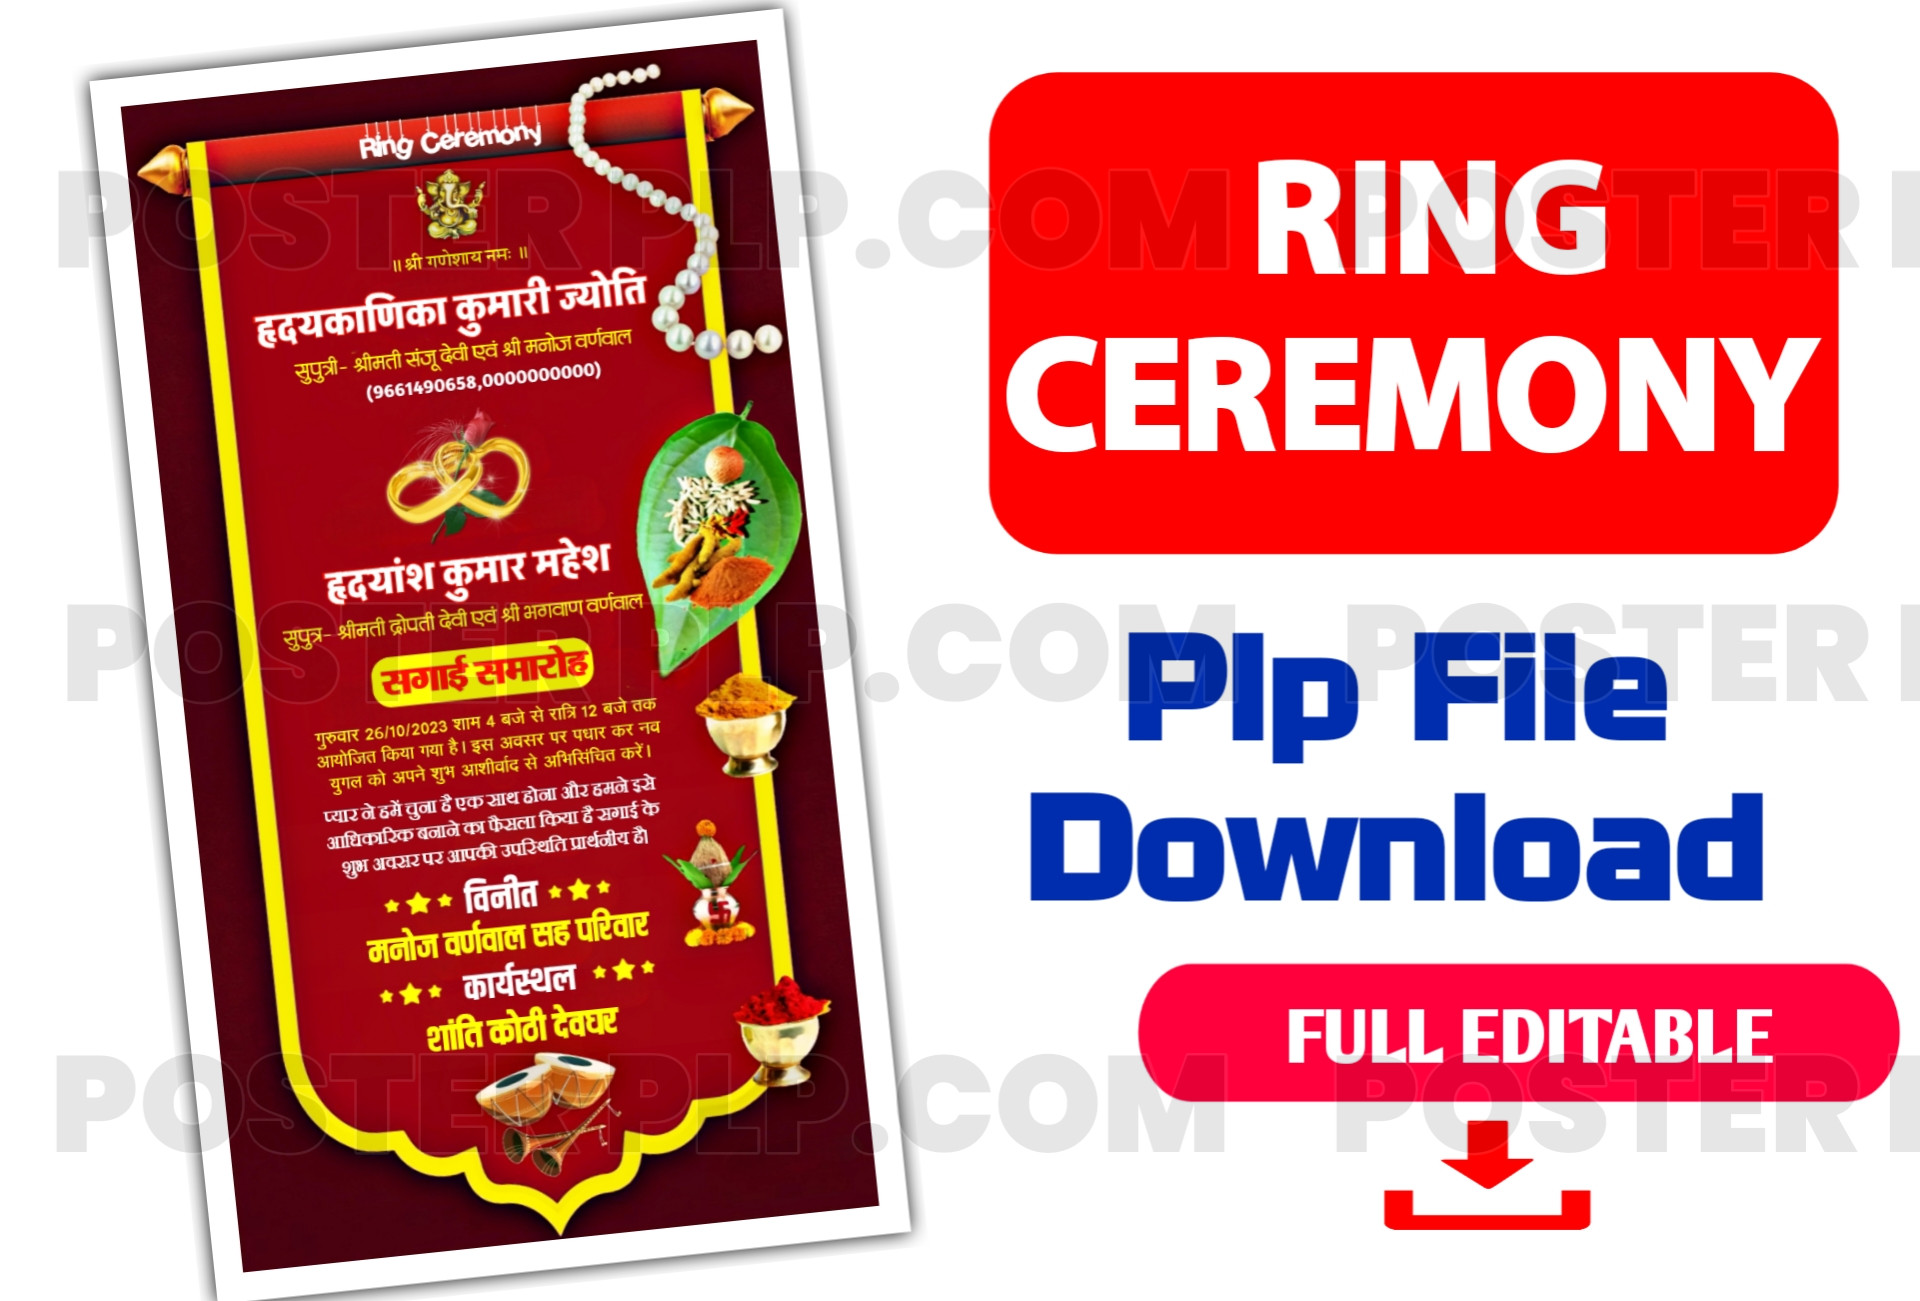 Ring ceremony card design in hindi plp file download